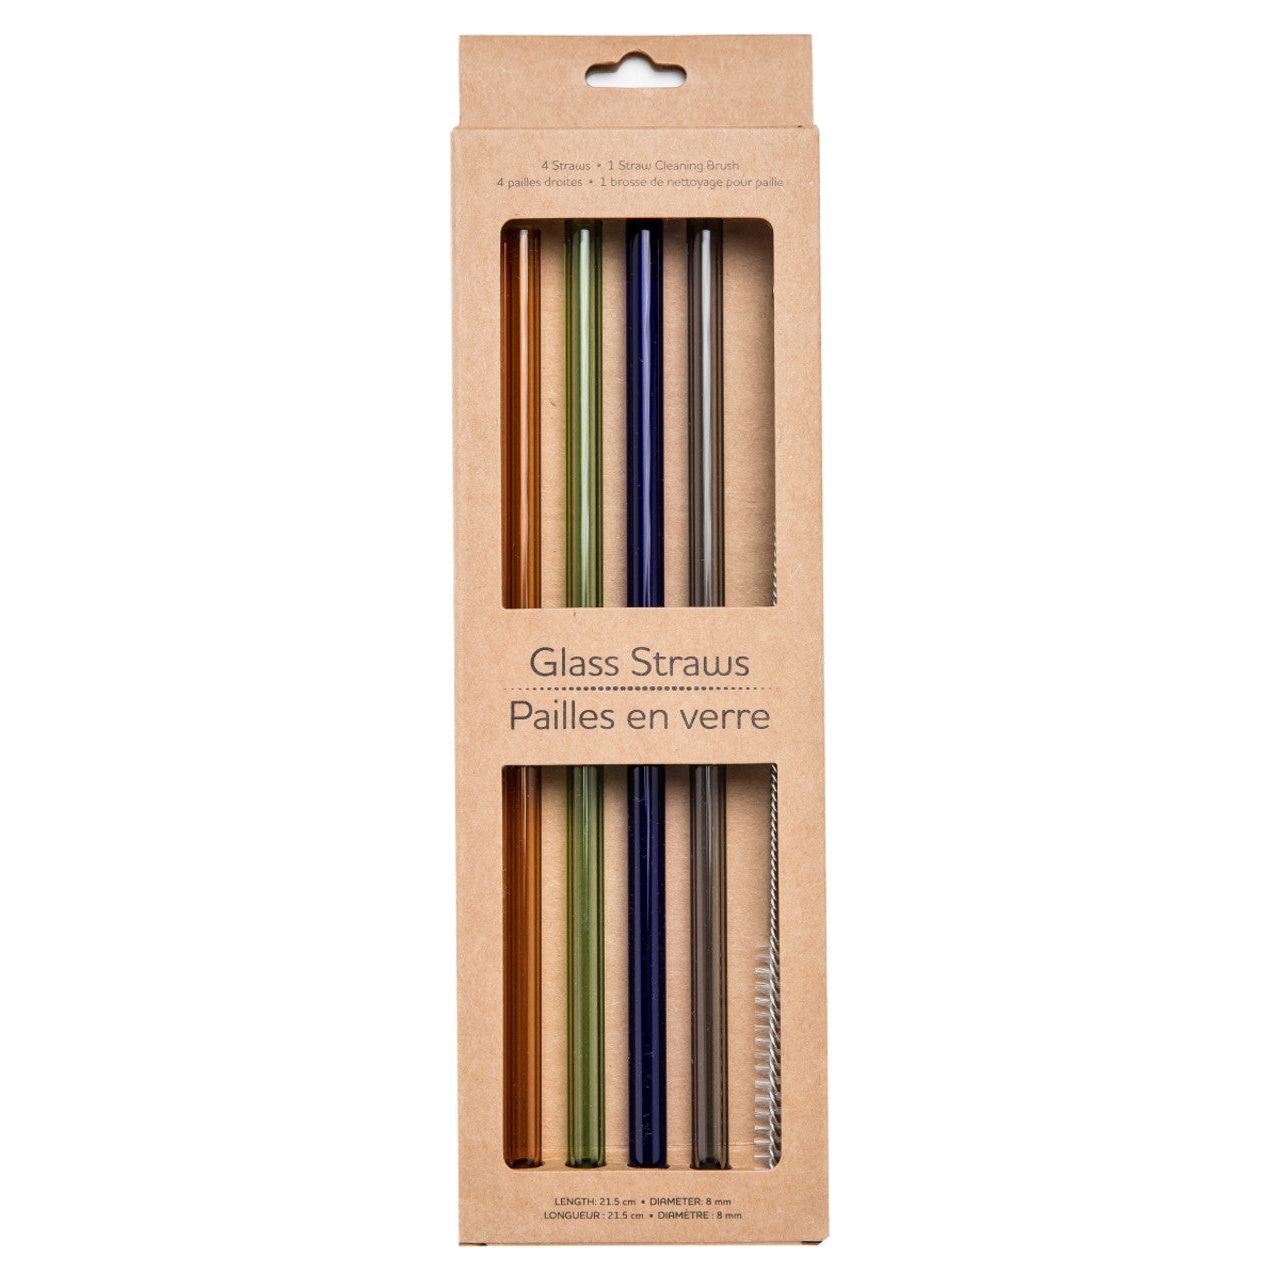 Glass Straws, Pack of 4 with Brush